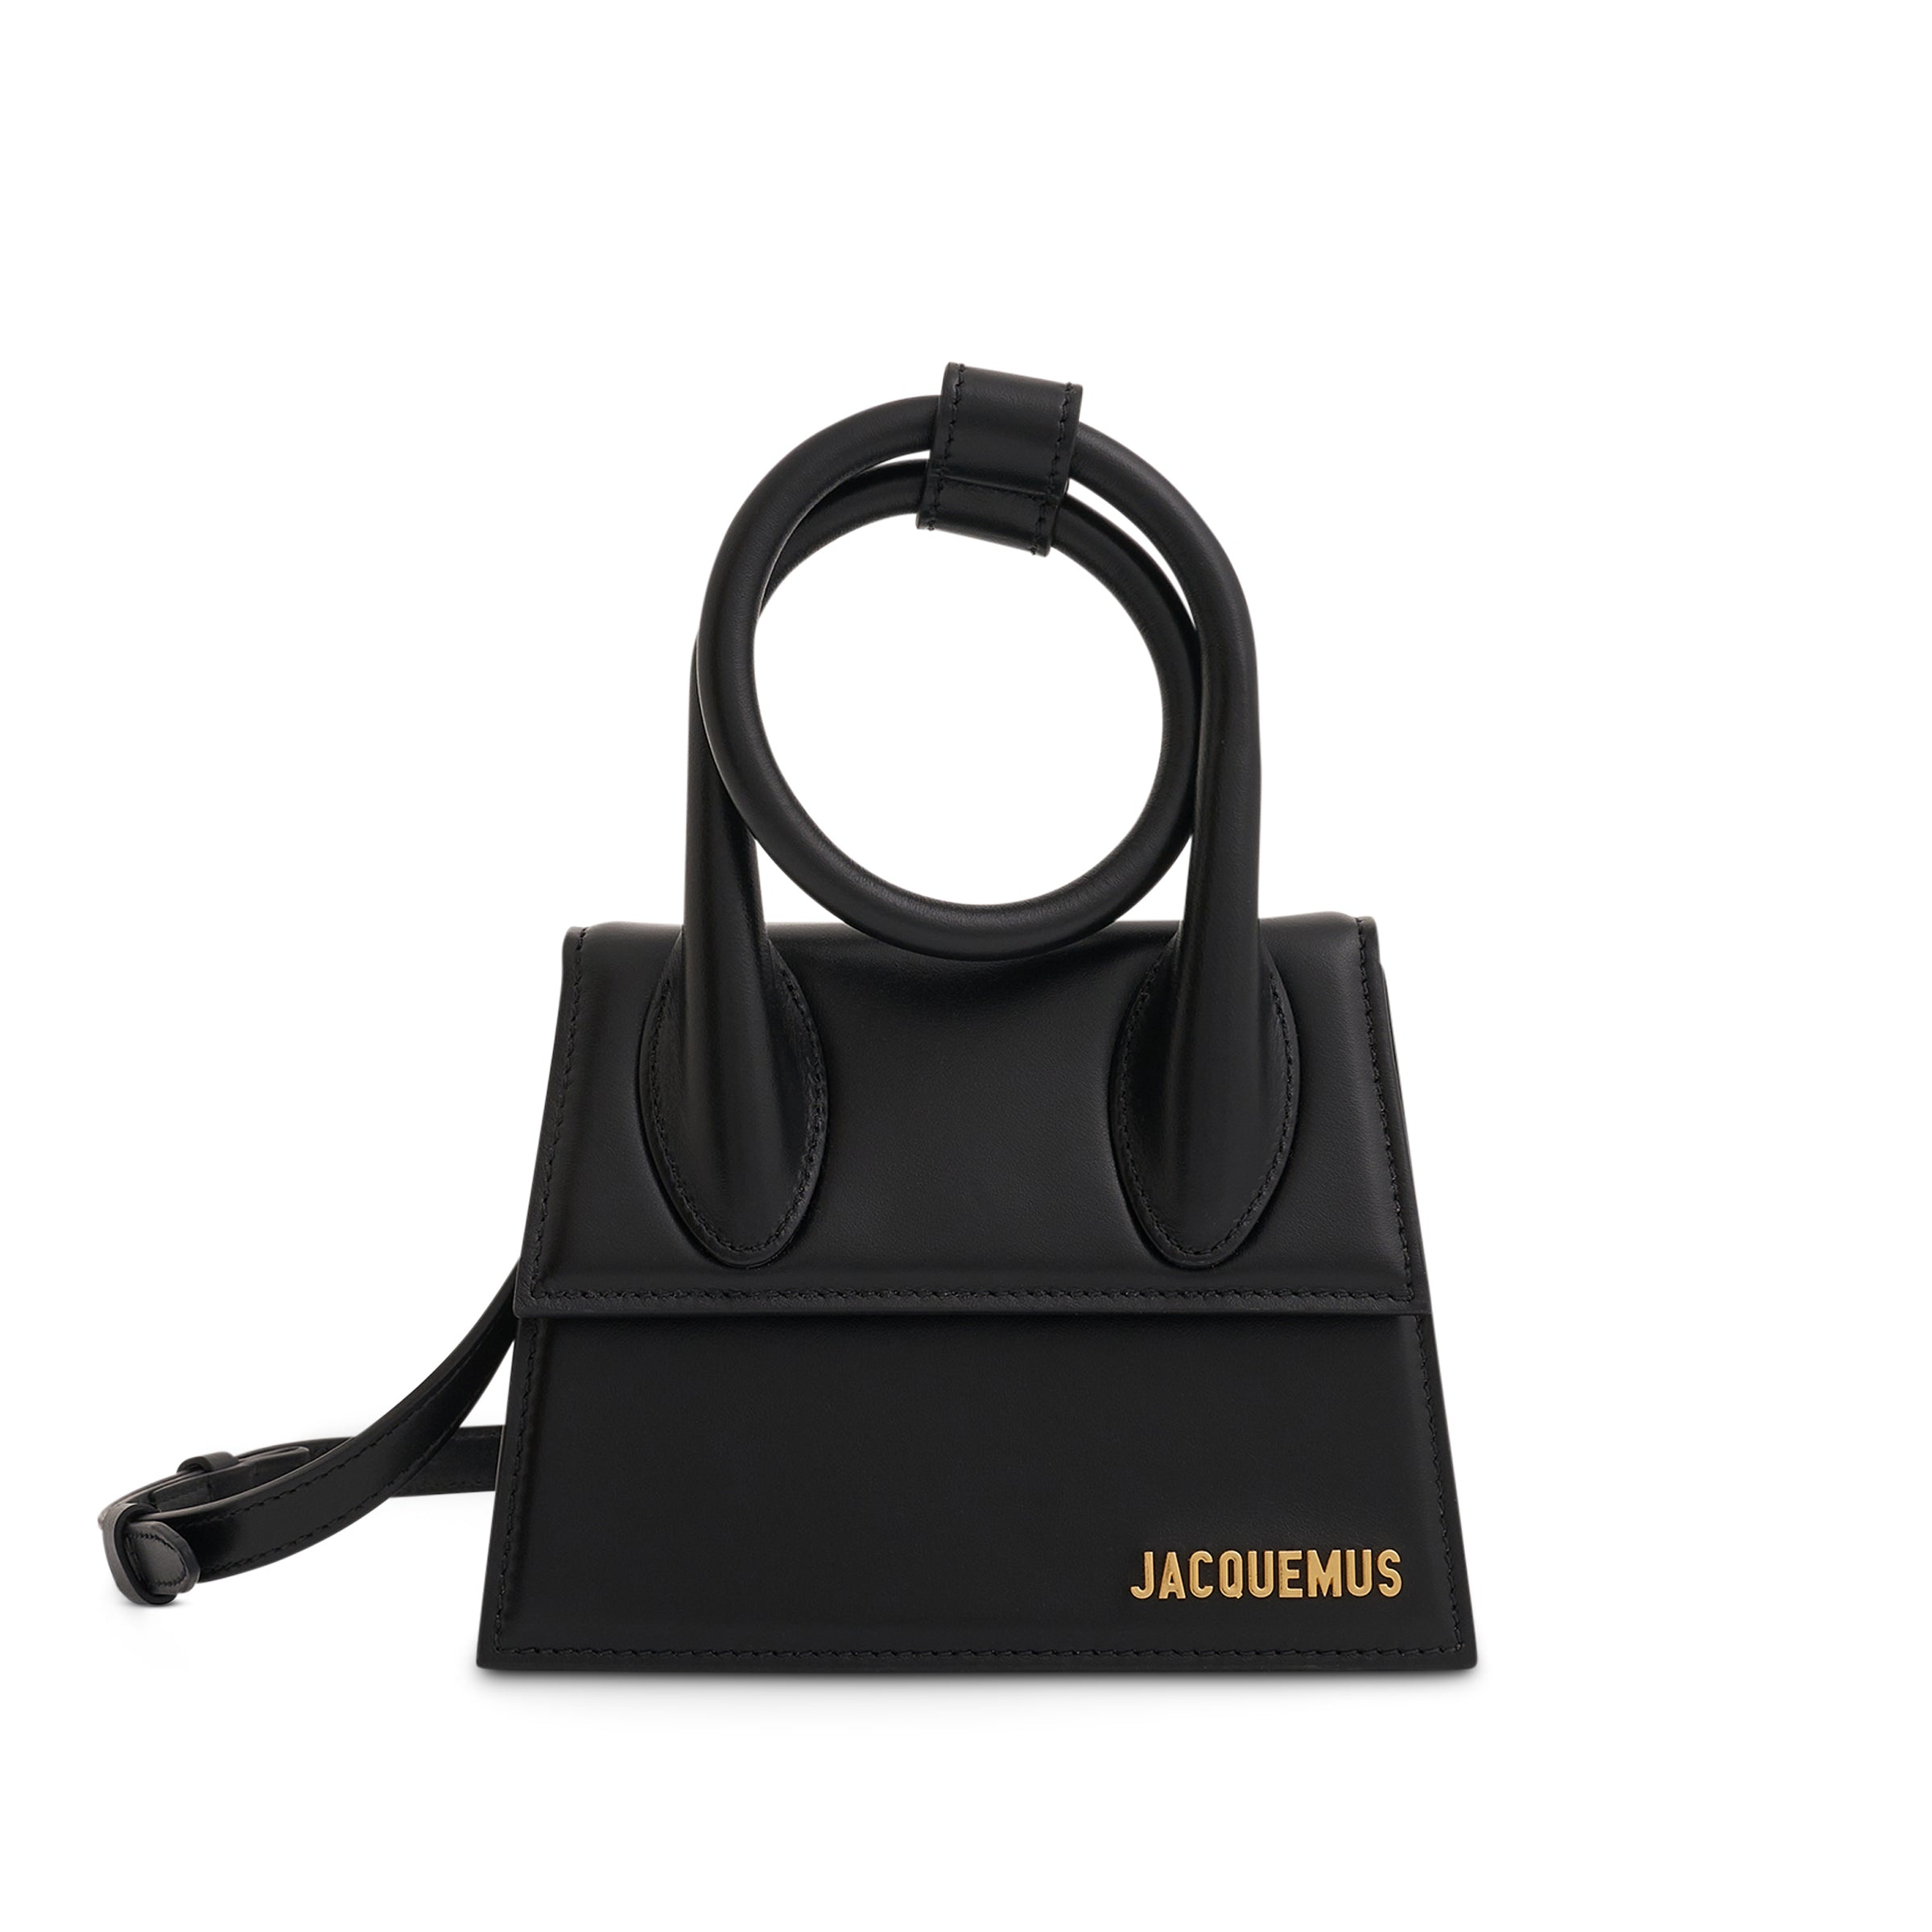 Le Chiquito Noeud Leather Bag in Black - 1